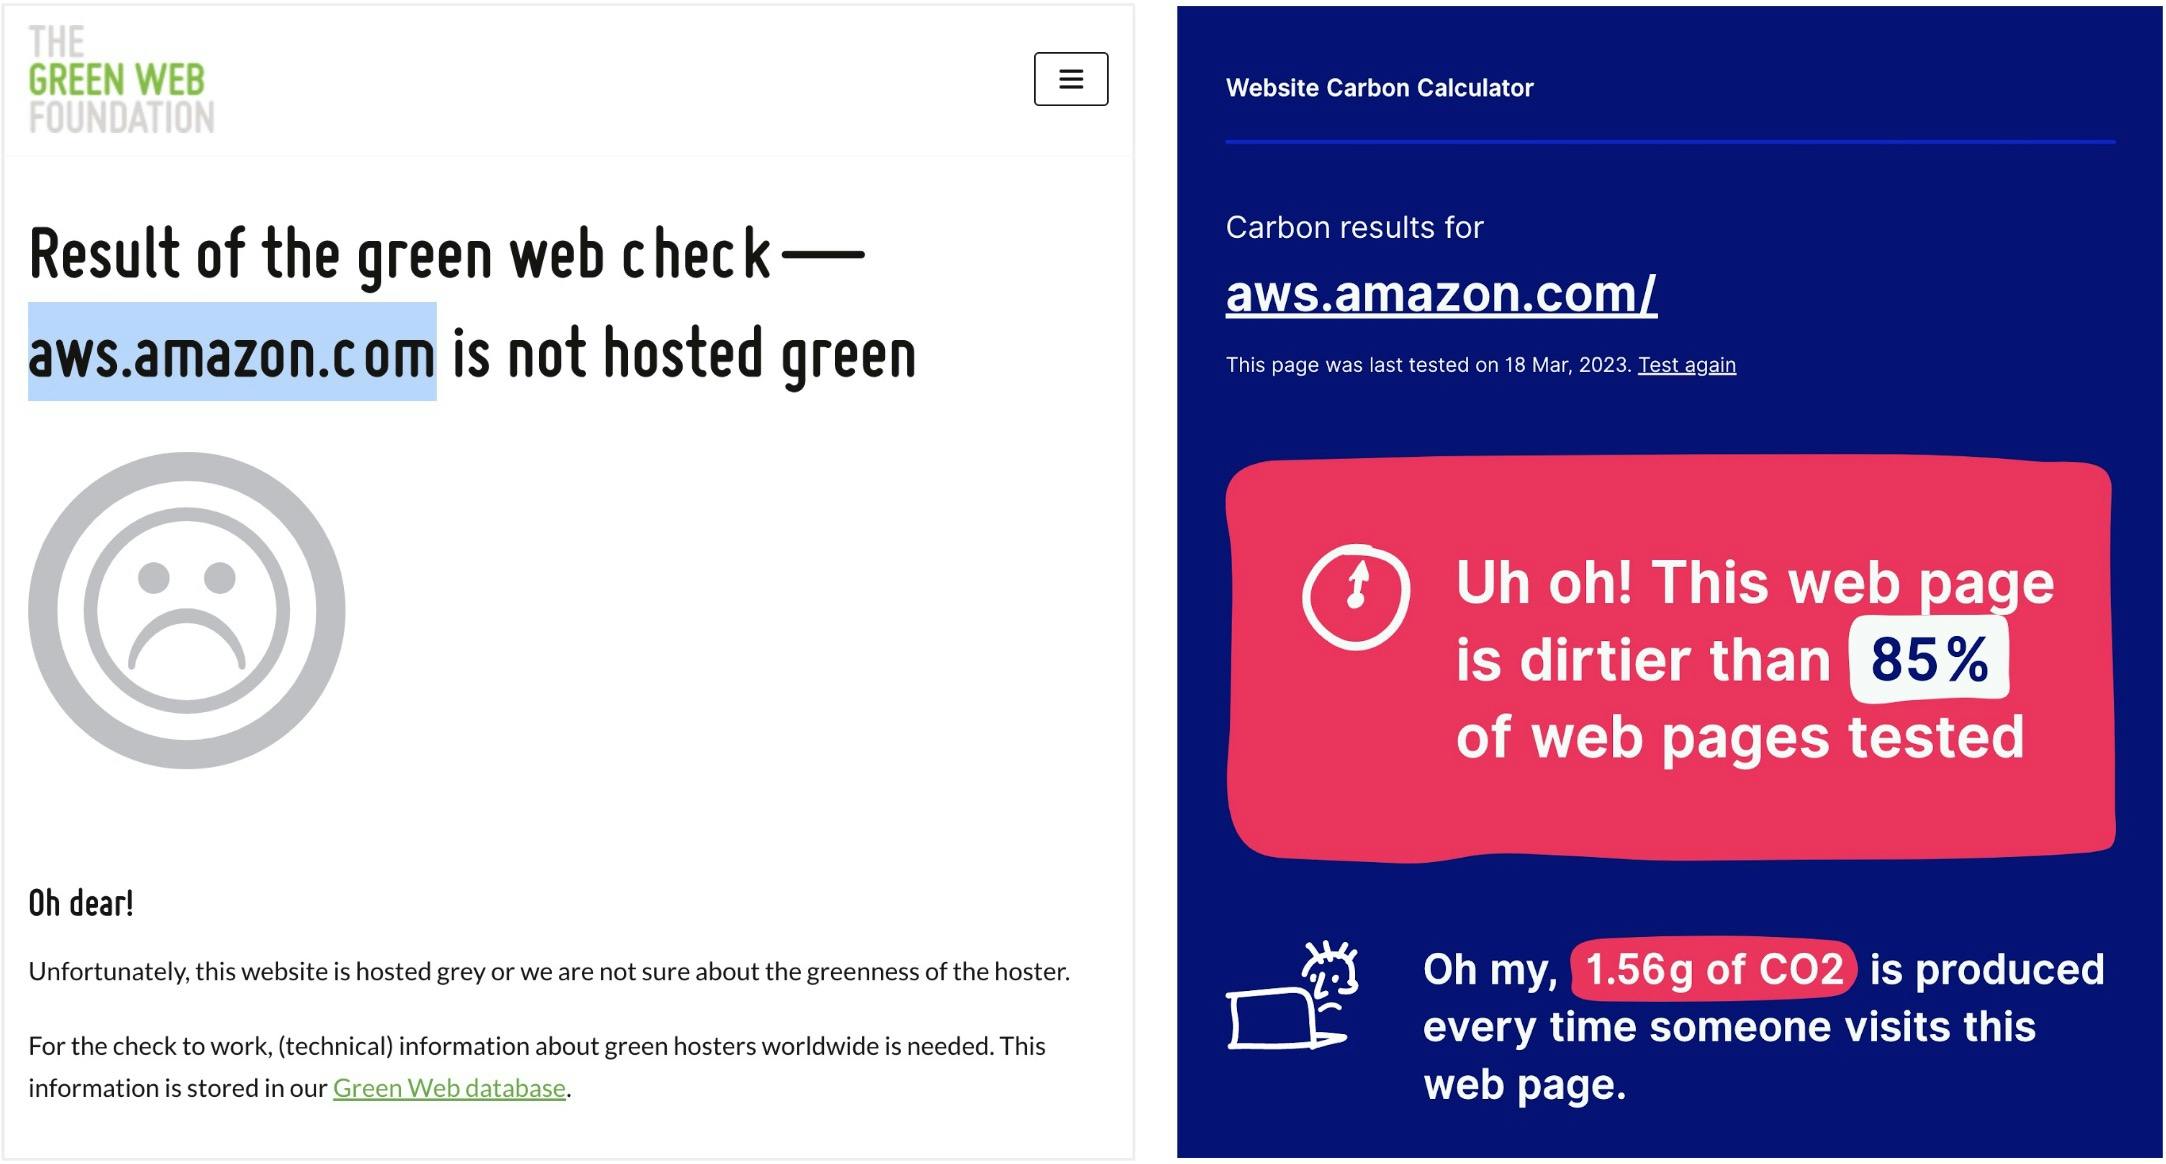 Left: The Green Web Foundation reports aws.amazon.com is not hosted green. Right: Website Carbon Calculator reports aws.azon.com is dirtier than 85% of web pages tested with 1.56g of CO2 for every web page visit.